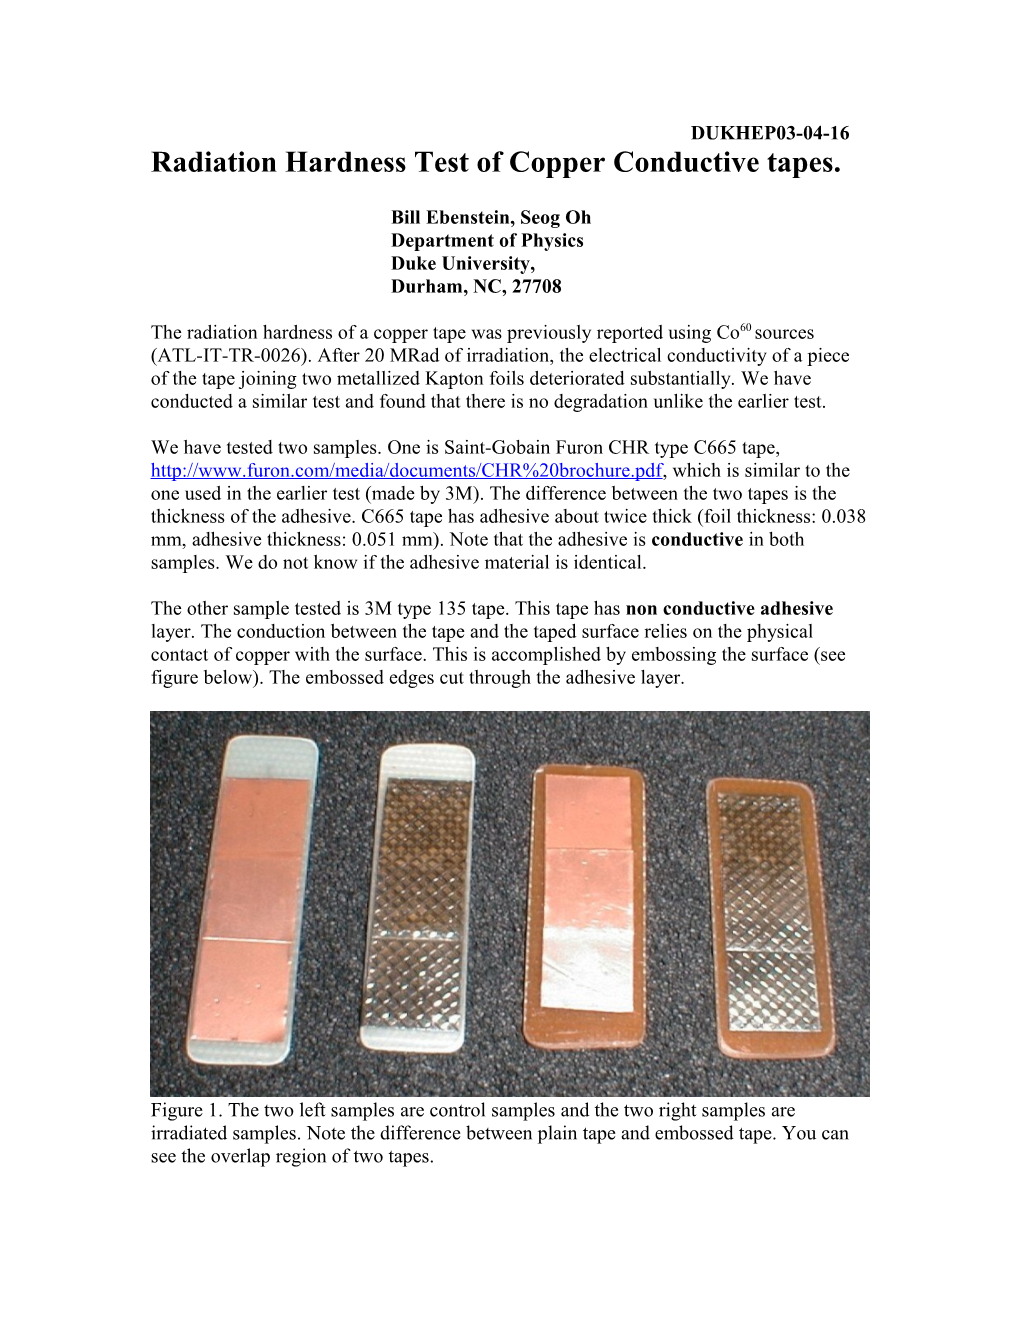 The Radiation Hardness of a Copper Tape Was Reported (ATL-IT-TR-0026) Using Co60 Sources